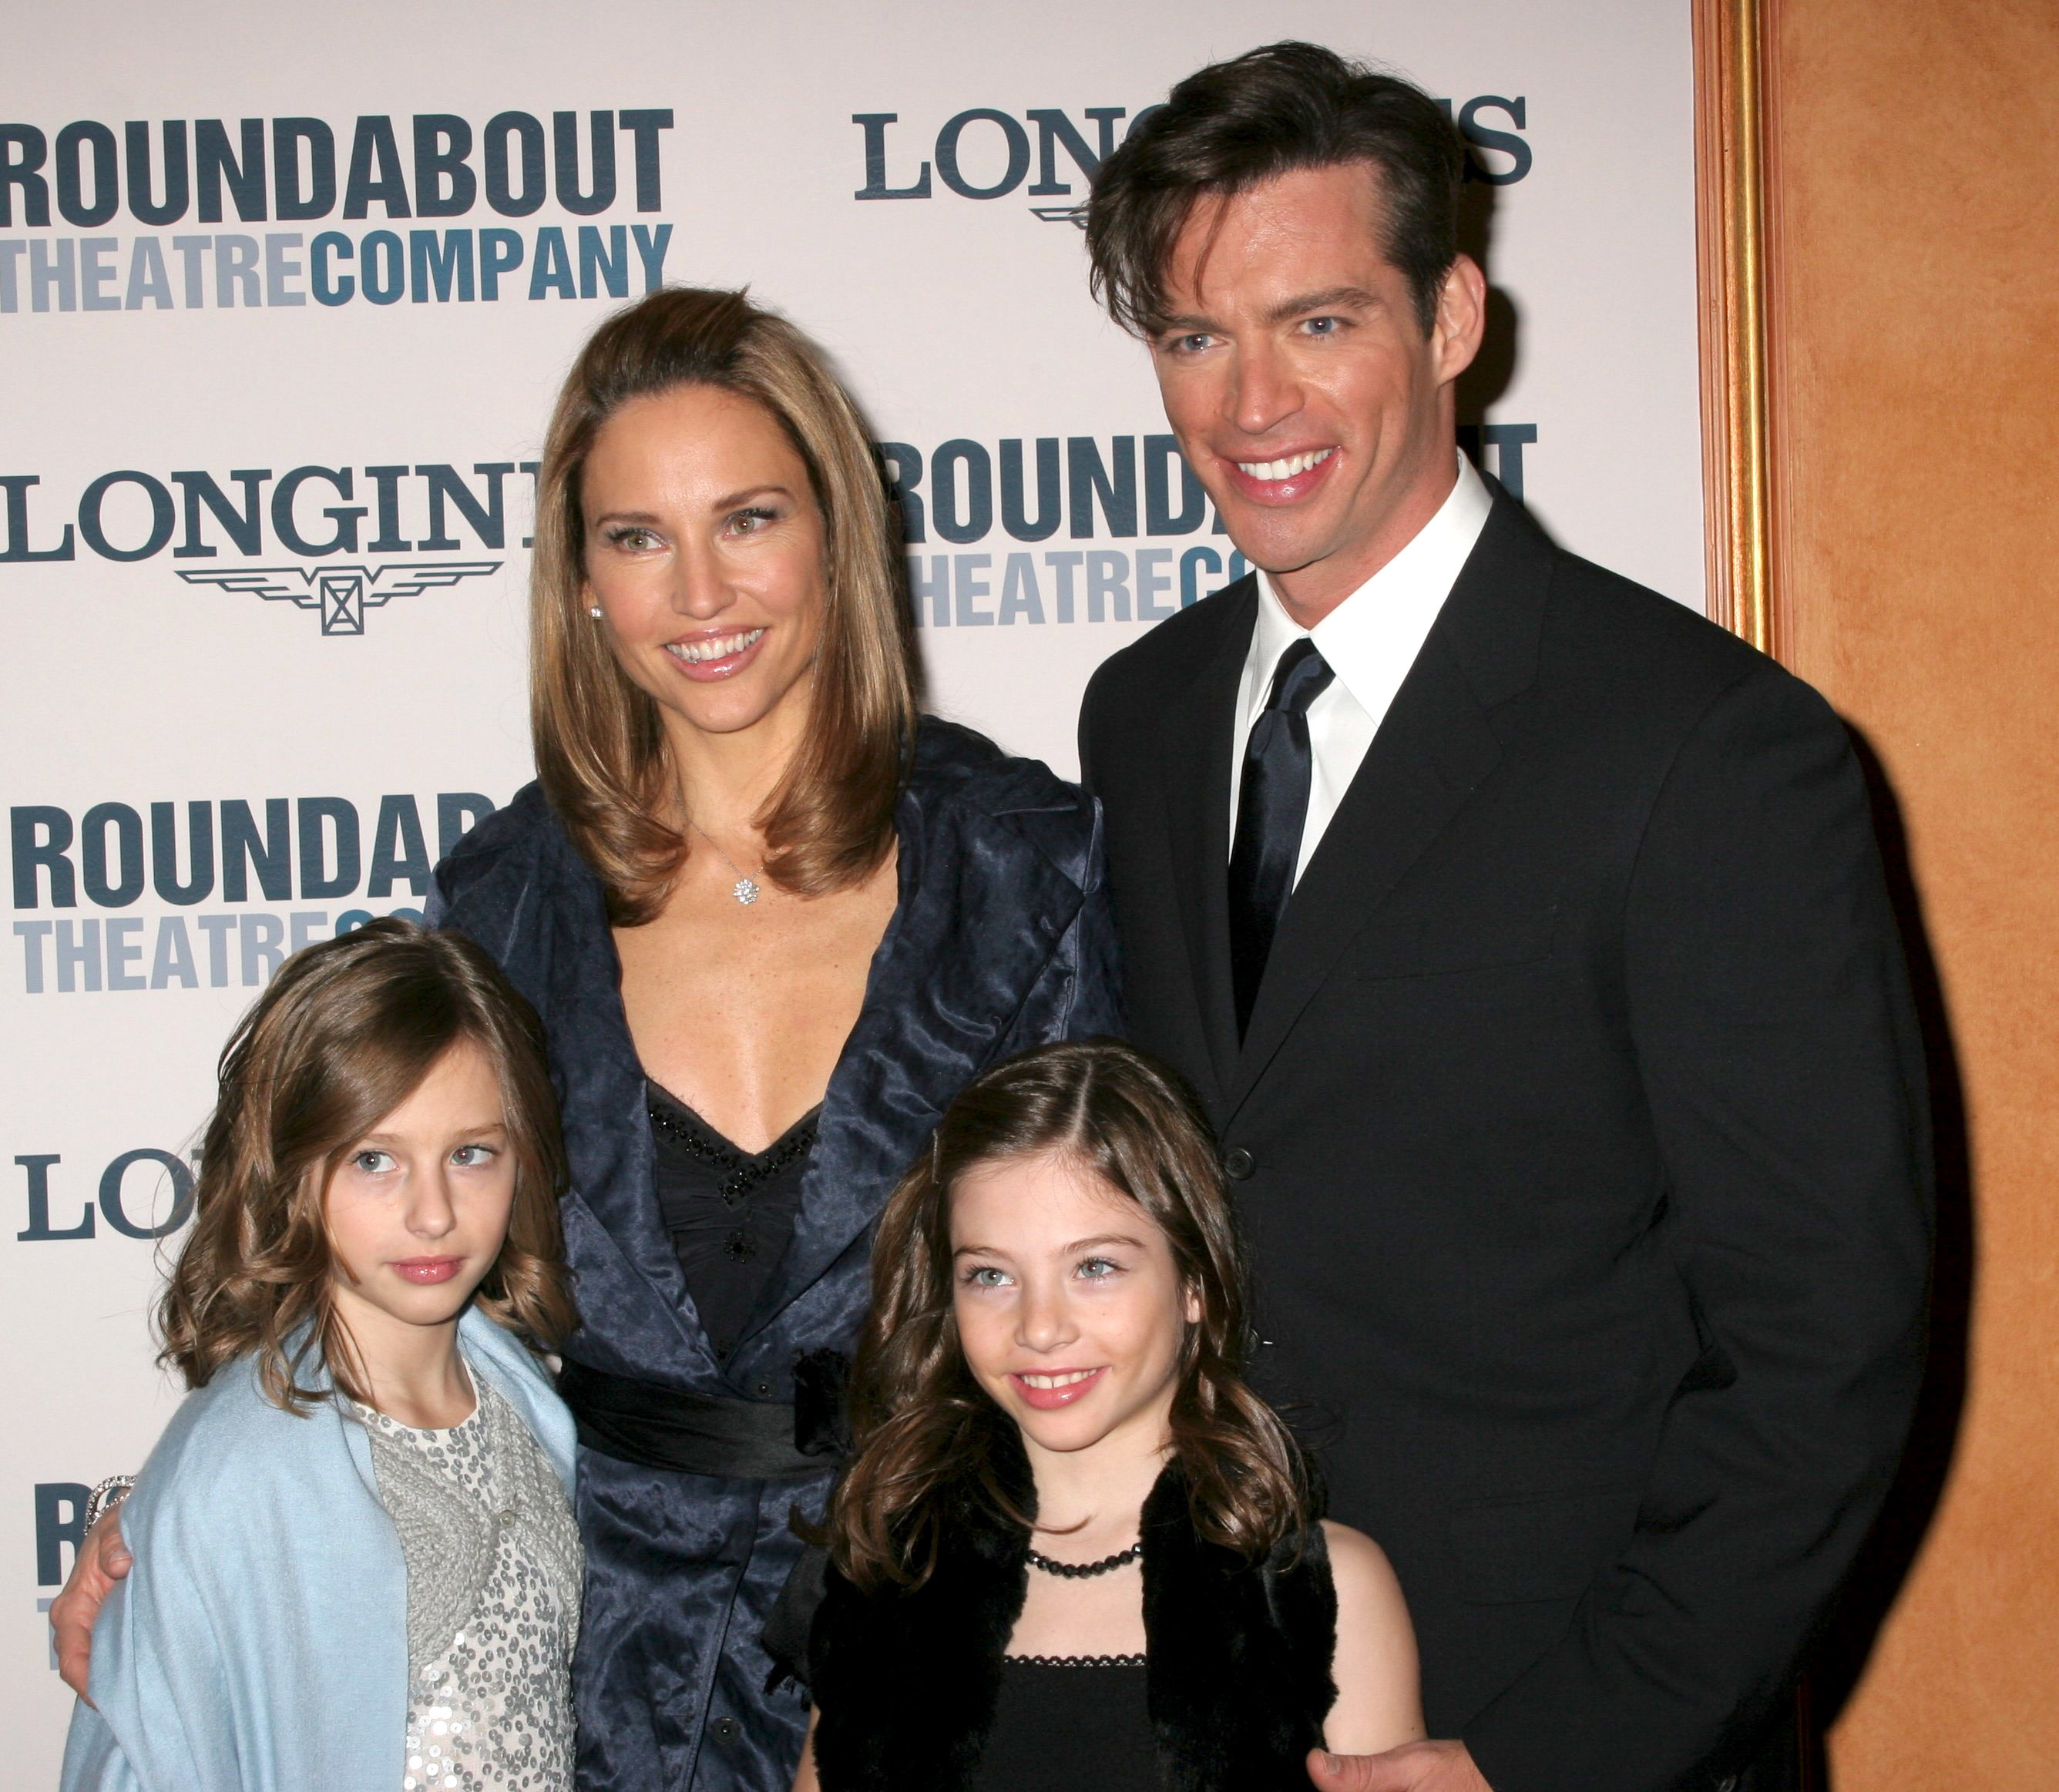 <p>Musician Harry Connick Jr. and model Jill Goodacre brought daughters Georgia and Kate to see "The Pajama Game" on Broadway on Feb. 23, 2006. The couple's youngest daughter, Charlotte, stayed home as she was just 3 at the time.</p>